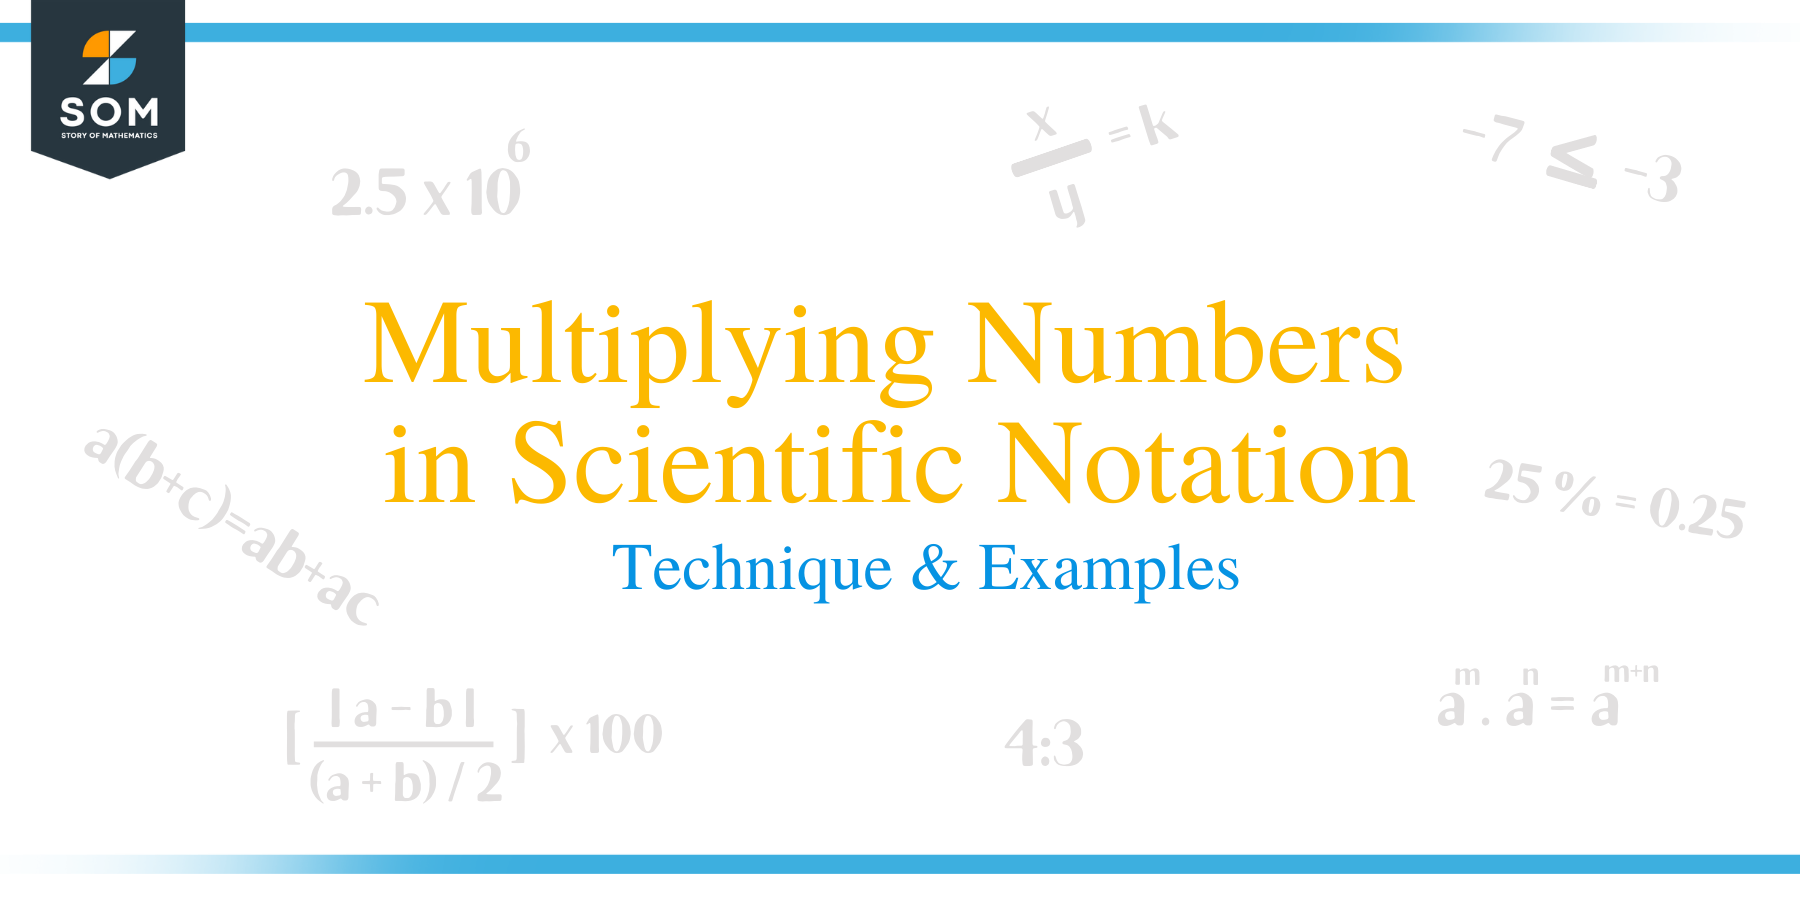 Multiplying Numbers in Scientific Notation